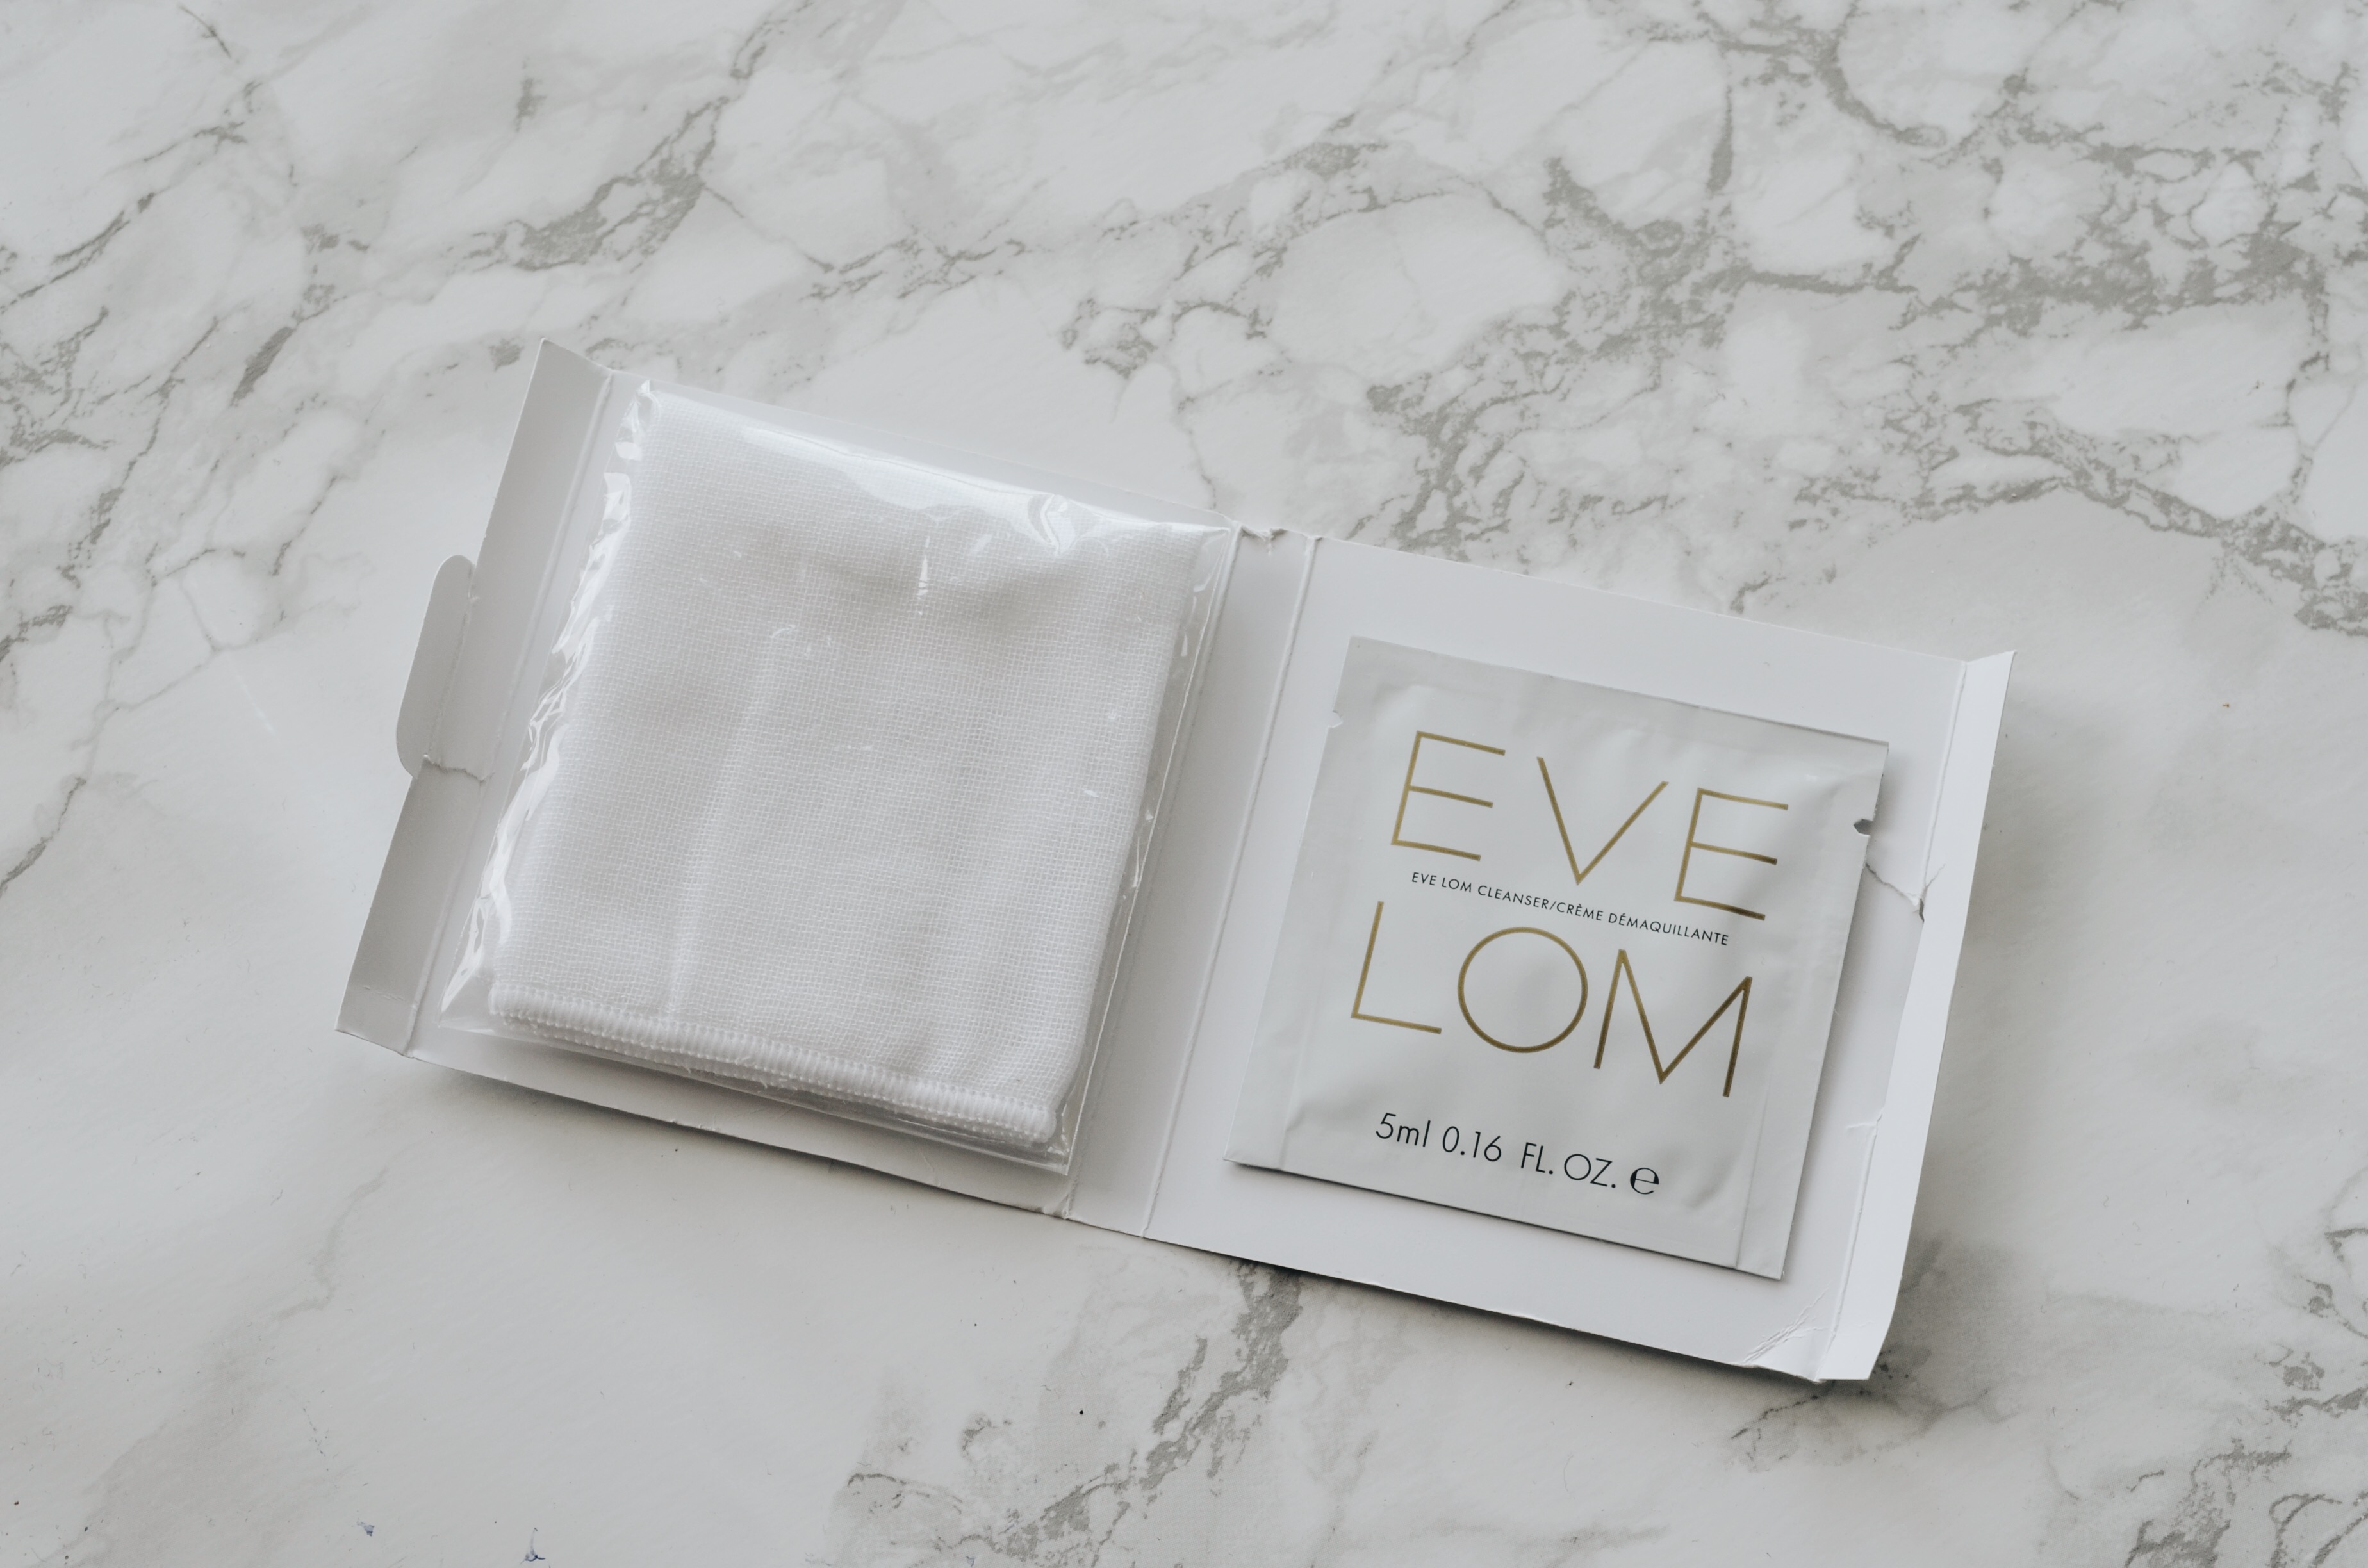 6. Eve Lom Cleanser and Cleaning Cloth | Full Size RRP £55.00